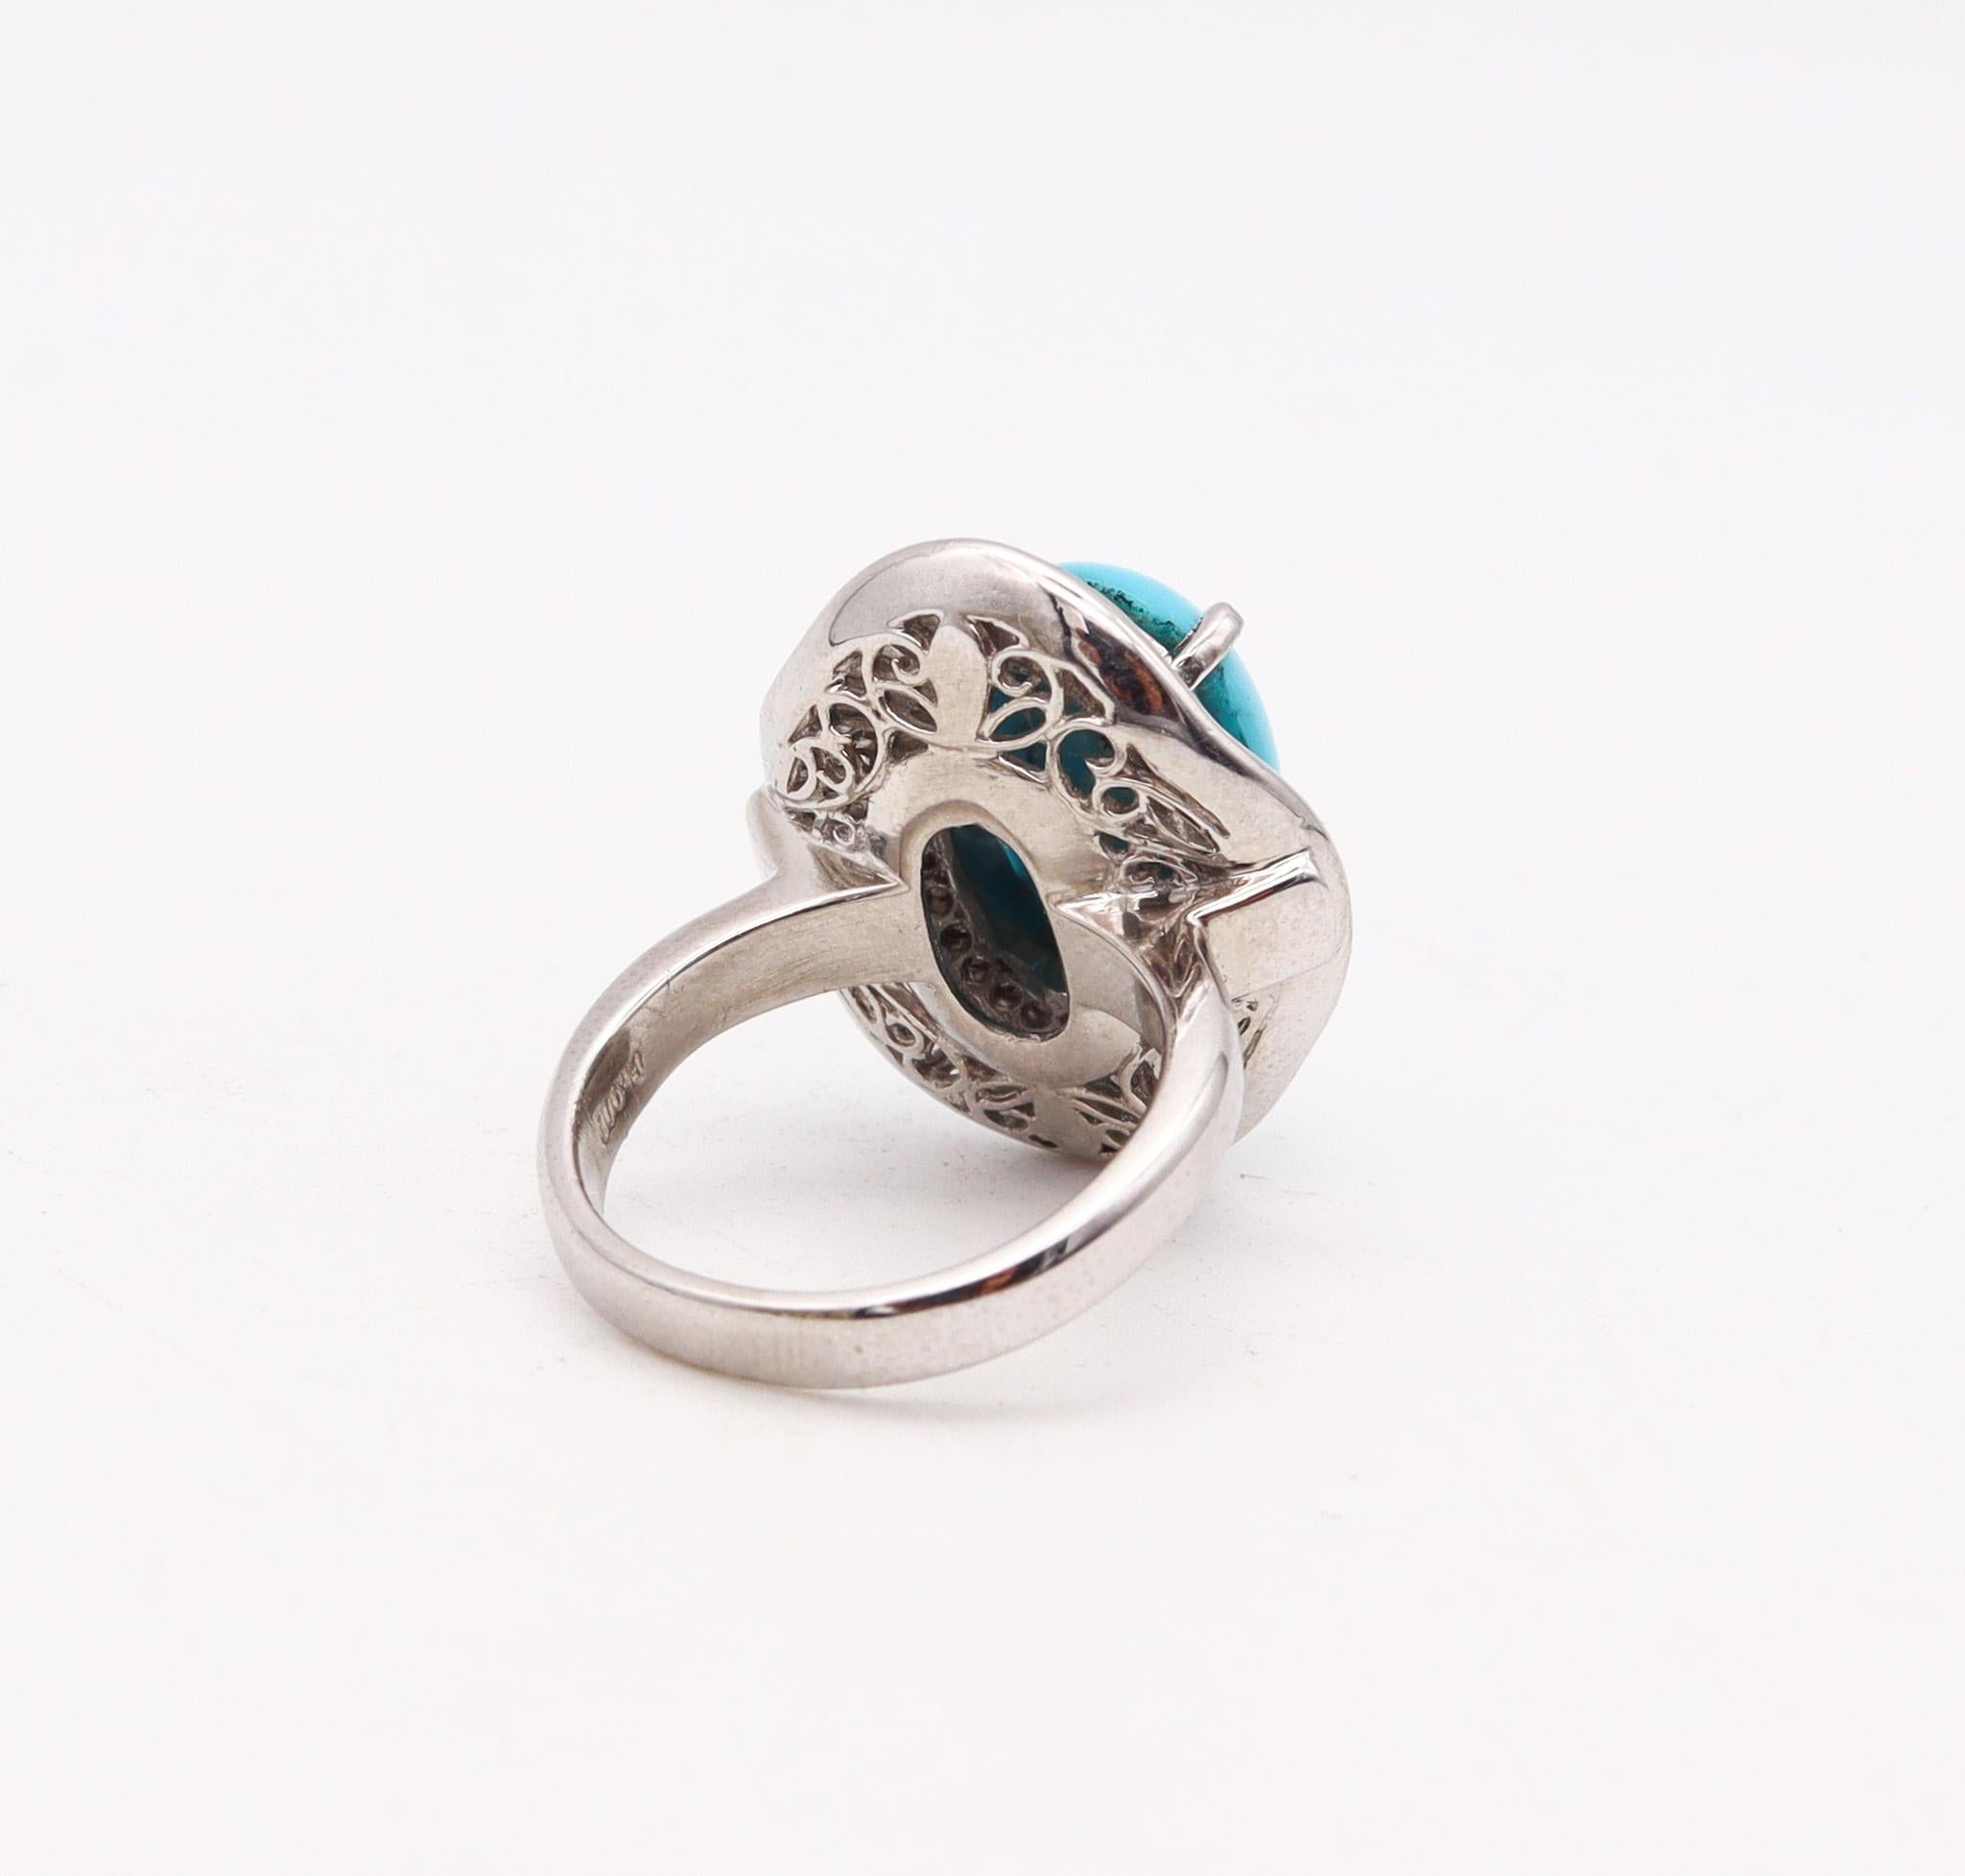 Ballerina Cocktail Ring In Solid Platinum With 10.02 Ctw Diamonds And Turquoise In Excellent Condition For Sale In Miami, FL